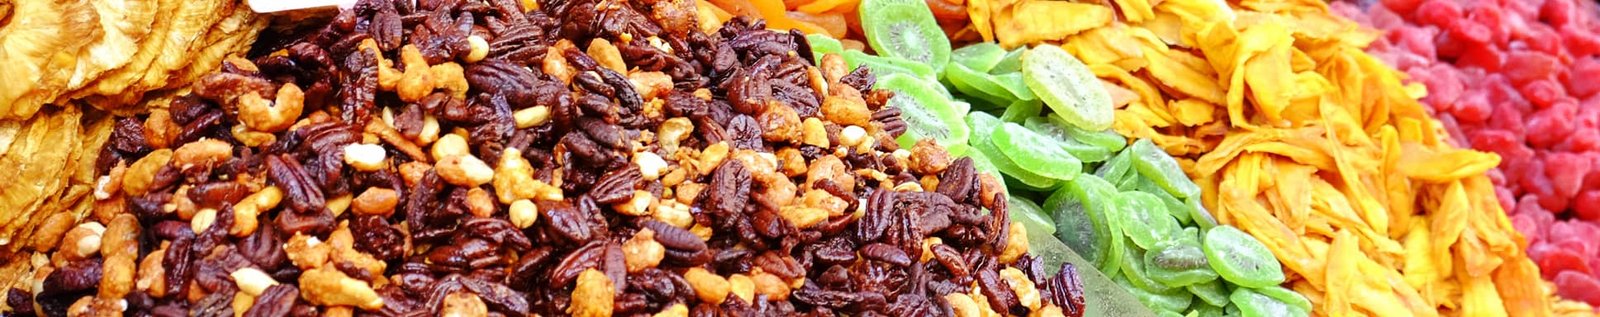 Dry Fruits and Market Tours Israel